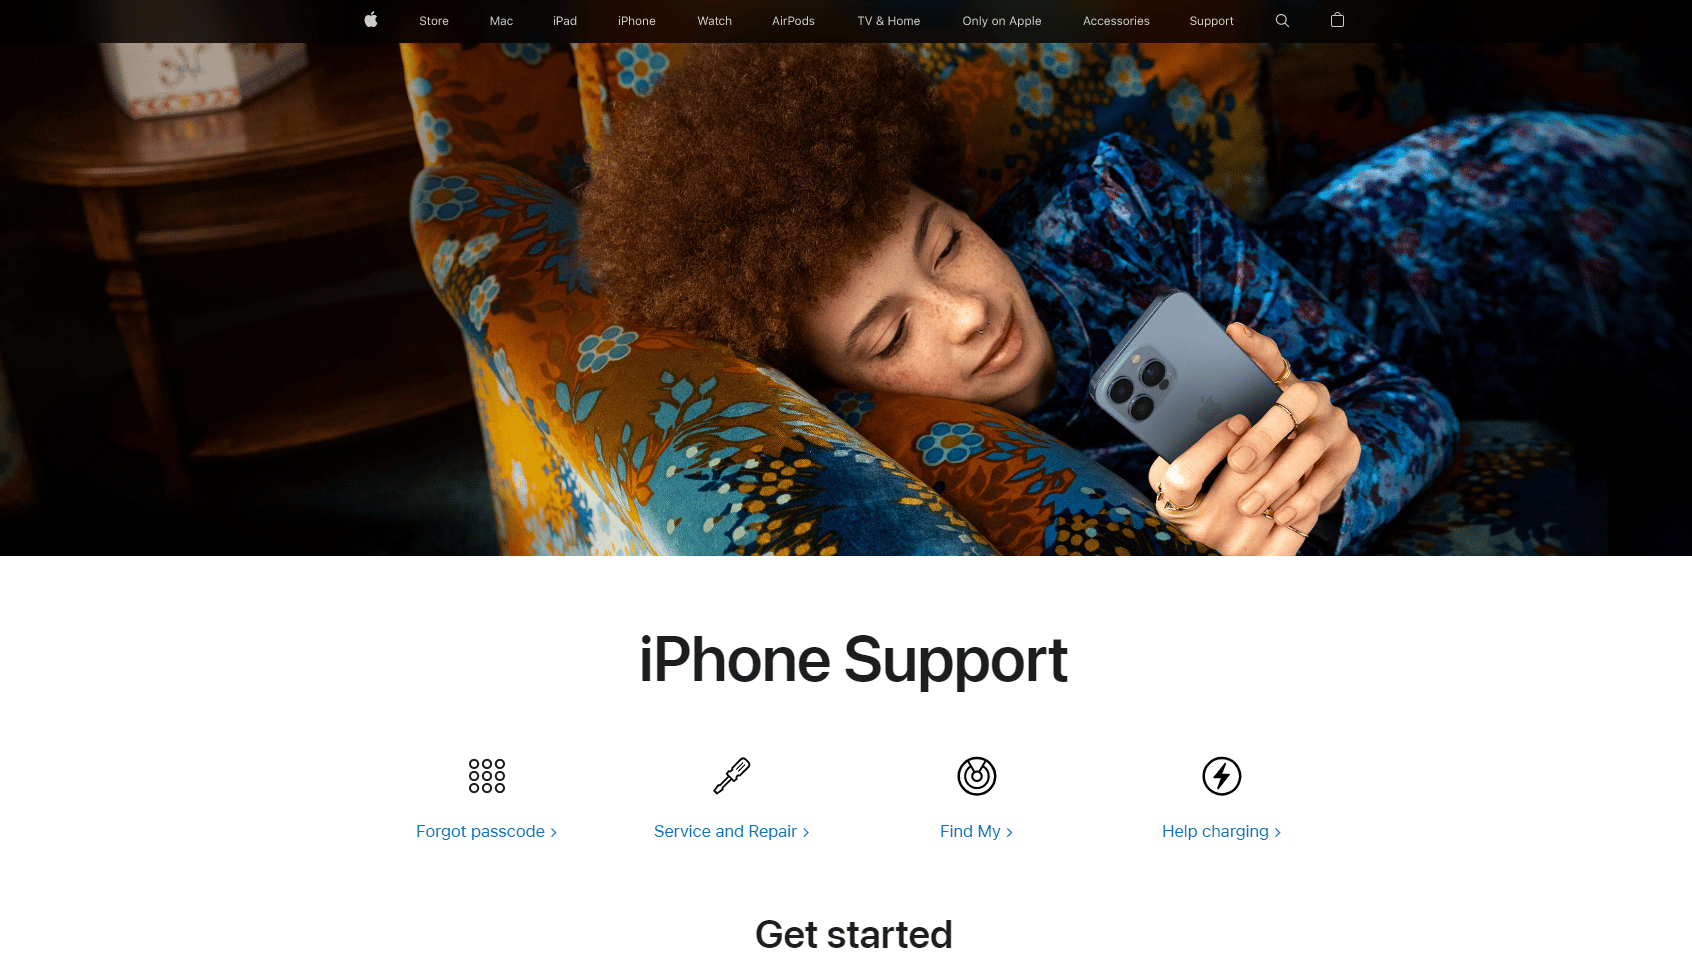 iPhone support